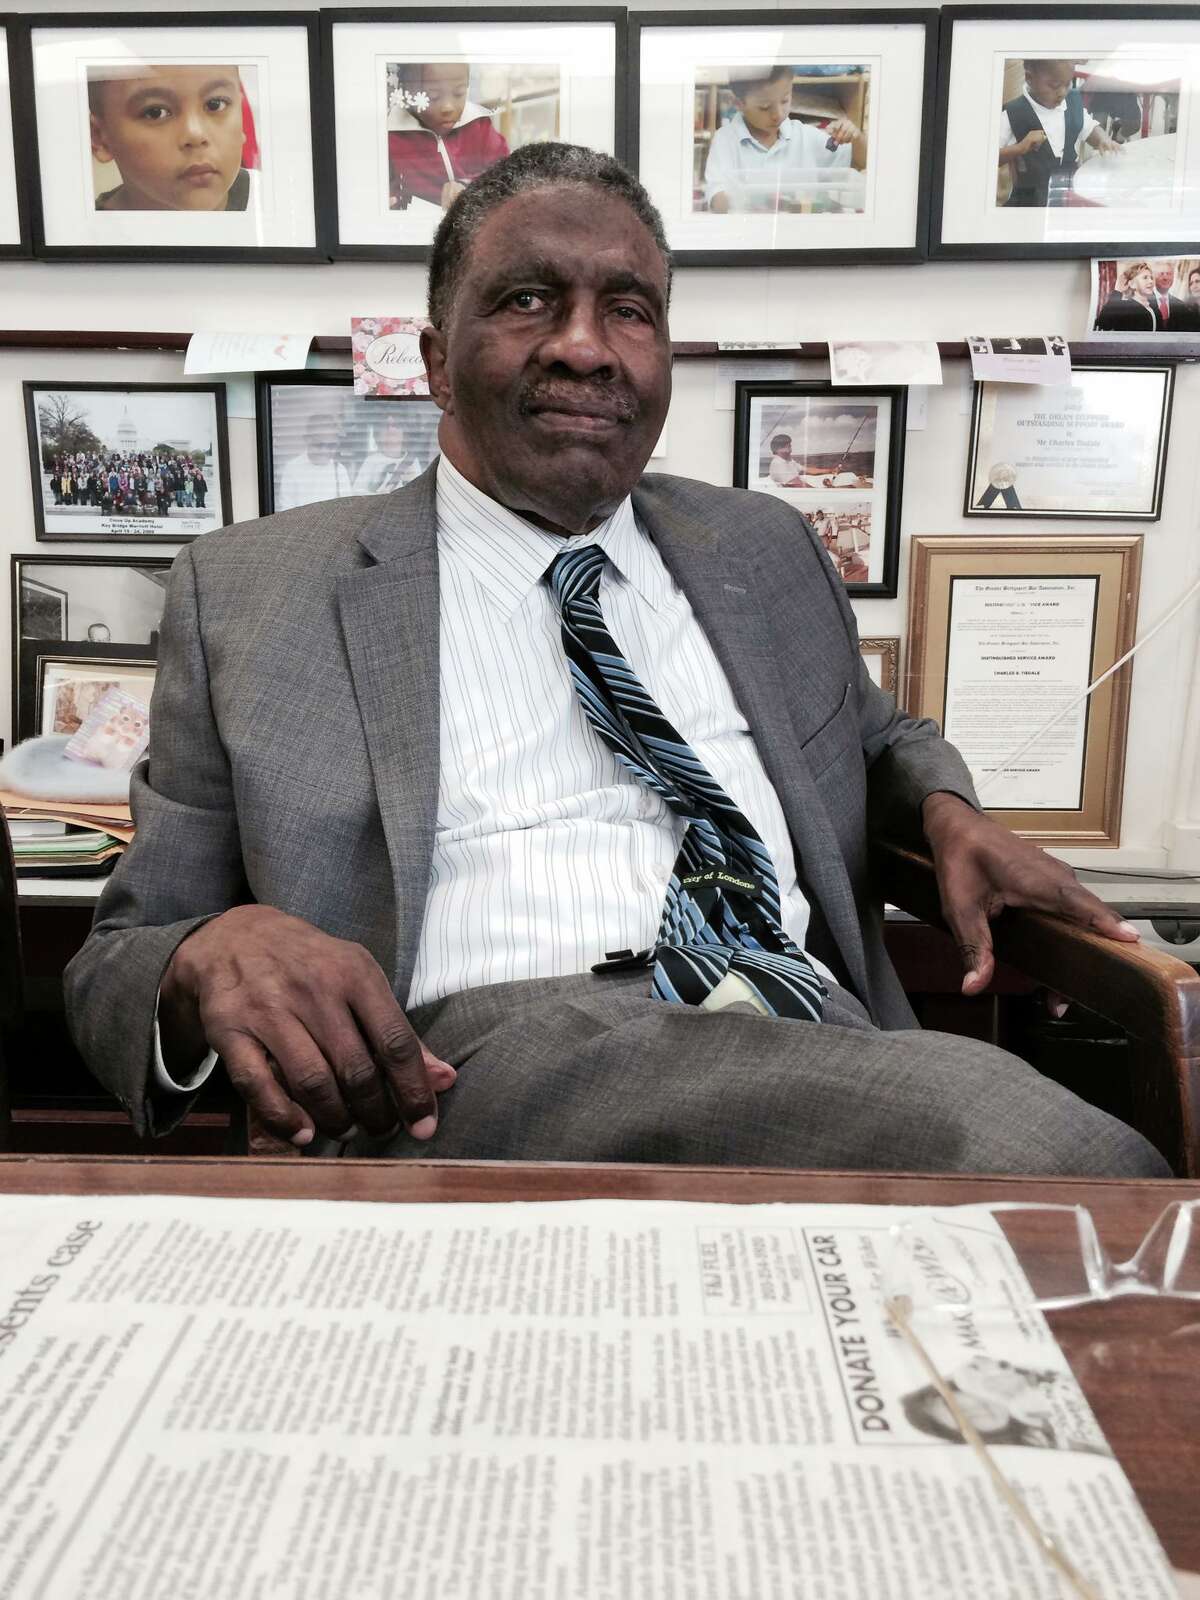 Charles Tisdale, the executive director of the multi-town anti-poverty agency ABCD Inc., in his Bridgeport, Conn., office on Sept. 16, 2014. Tisdale was a foot soldier in the fight for civil rights and desegregation back in the 1960s. He said that thanks to Connecticut’s “home rule” system of government, Bridgeport's schools remain as badly segregated as they were when the Brown vs. Board of Education ruling was made in 1954.